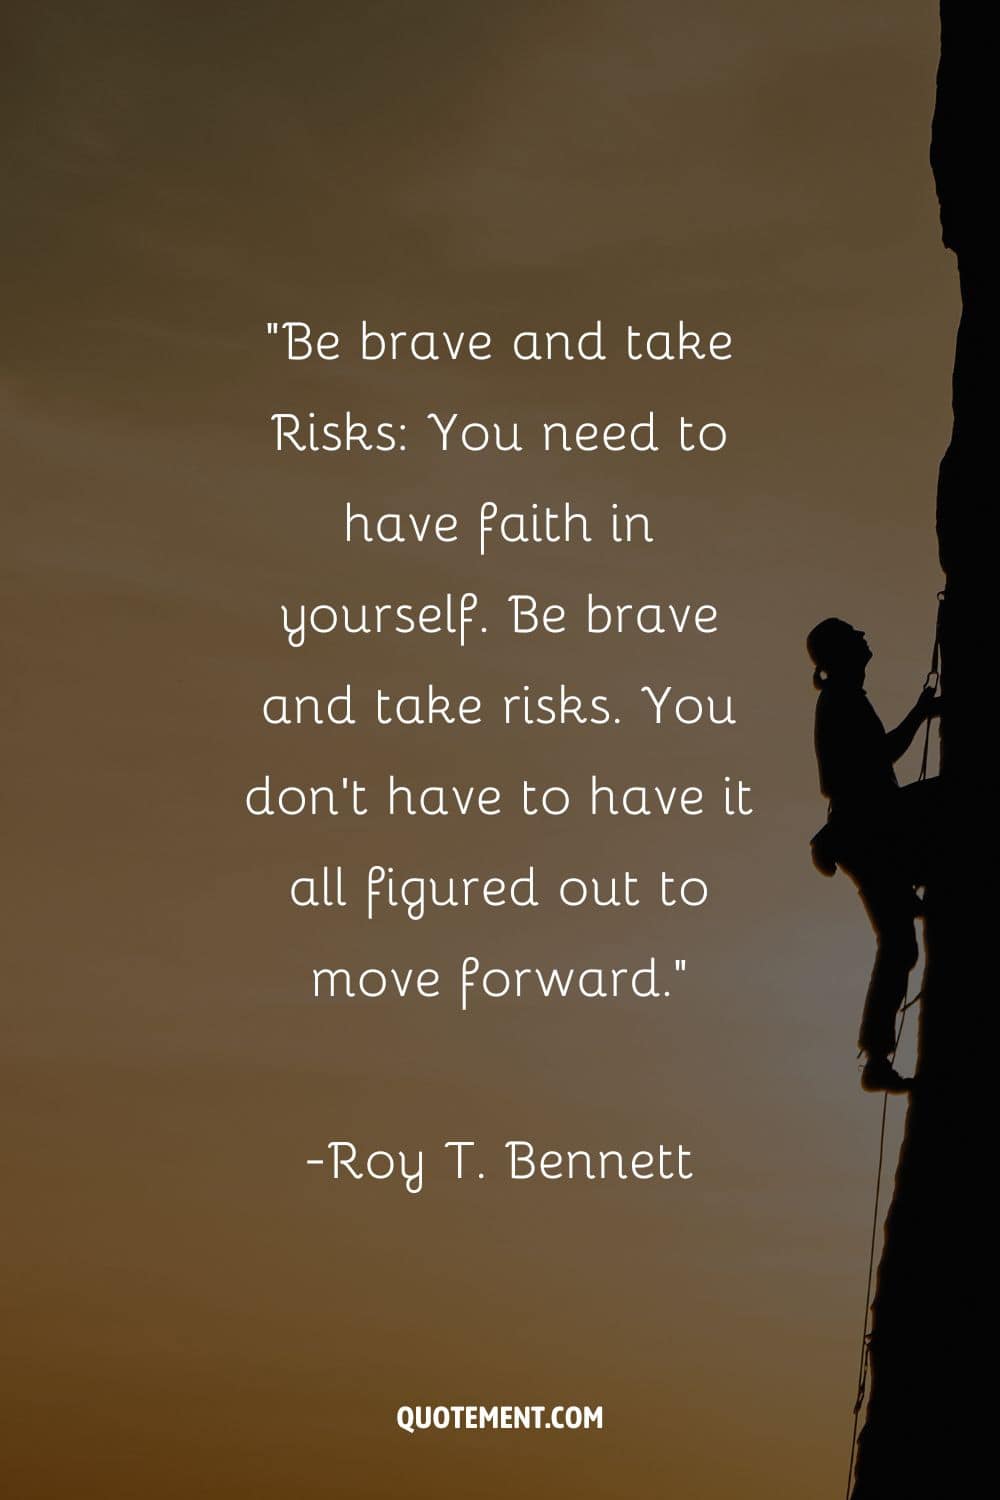 climber ascending a rugged mountain representing be brave quote